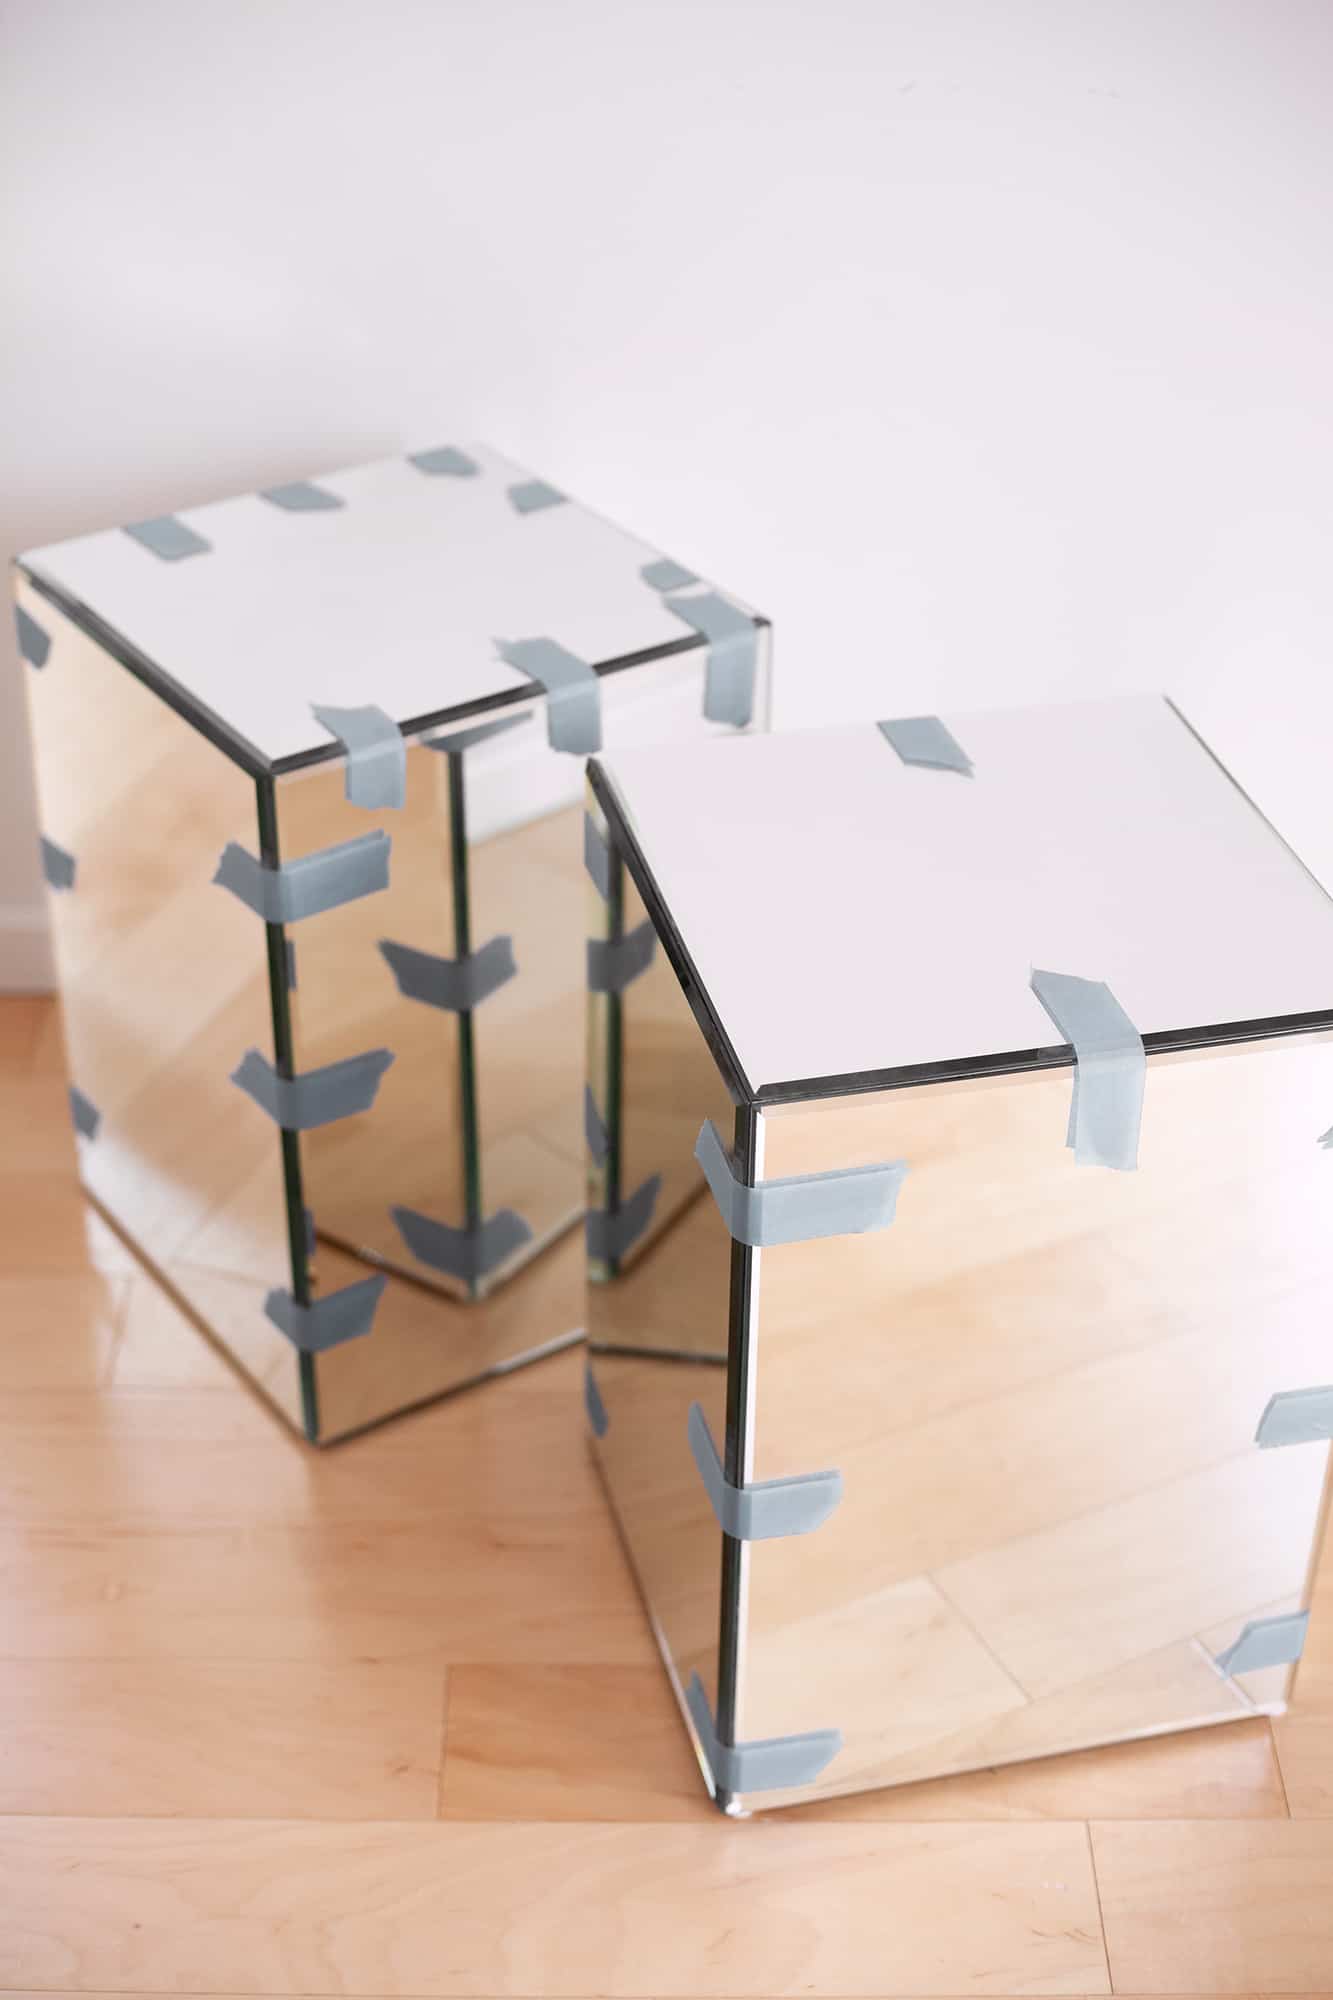 How To Make Mirrored Side Tables A, How To Make Mirrored Bedside Table